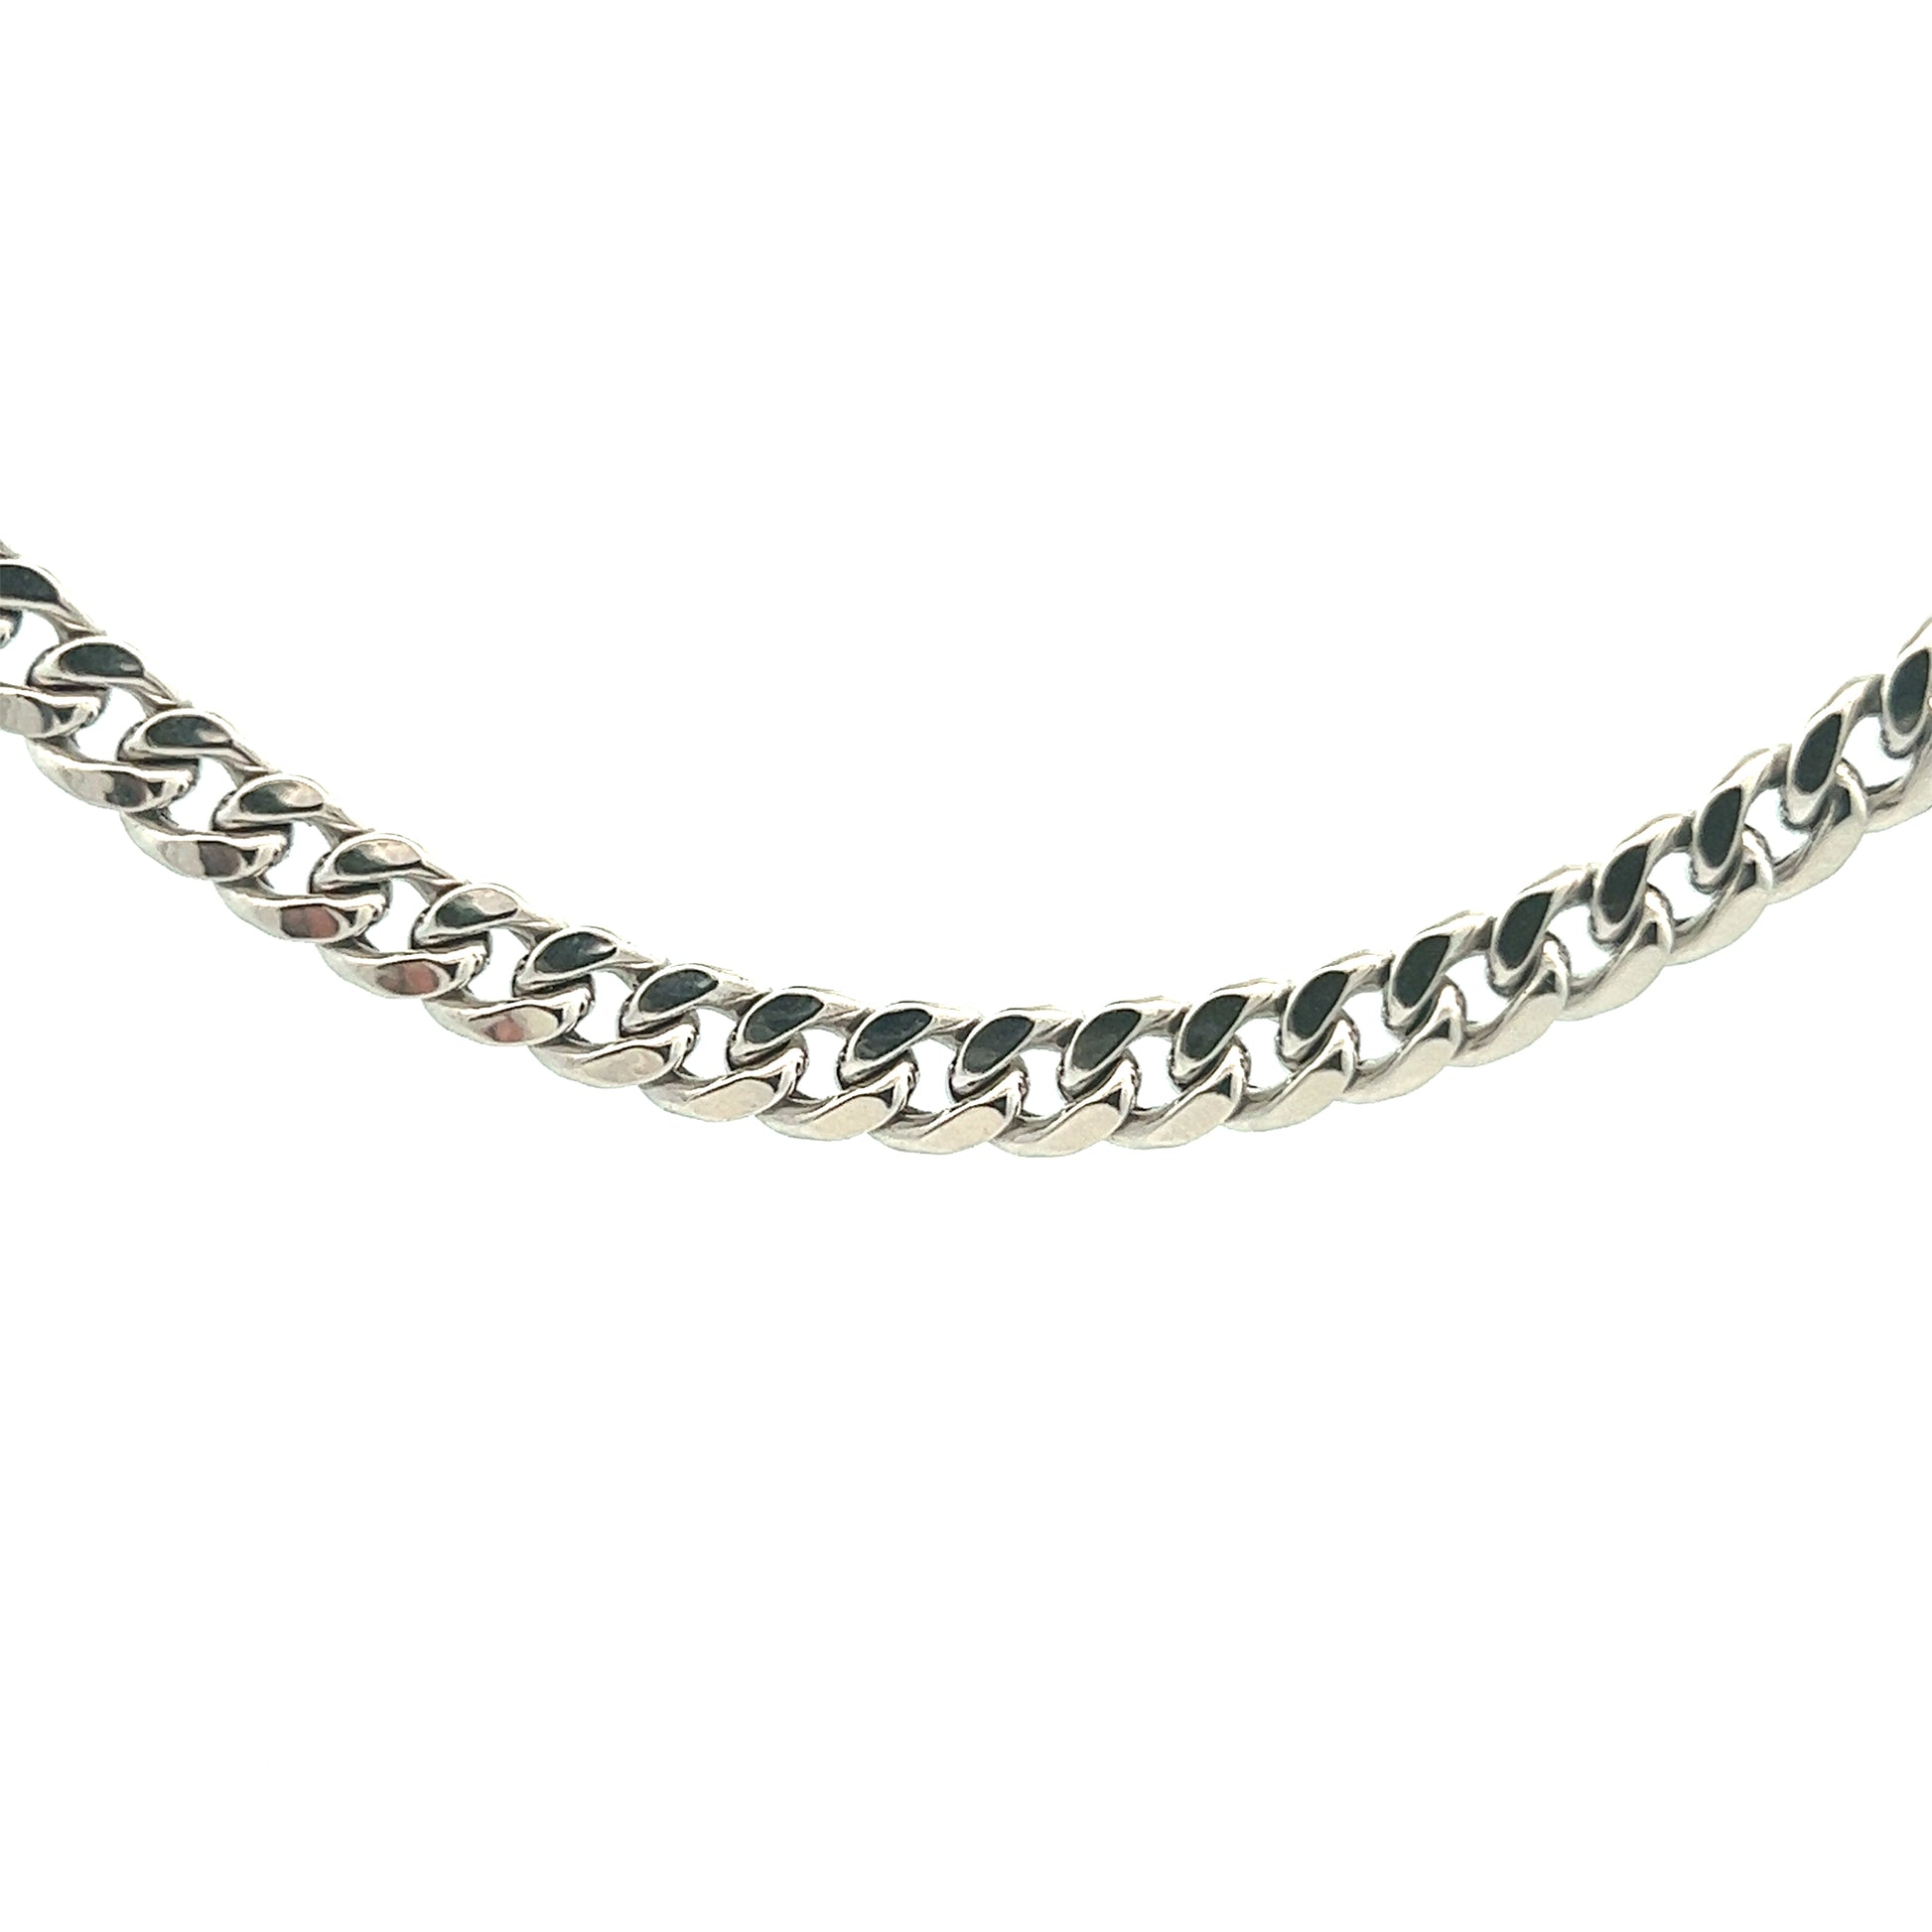 Gold Chain Necklace 10K White Gold